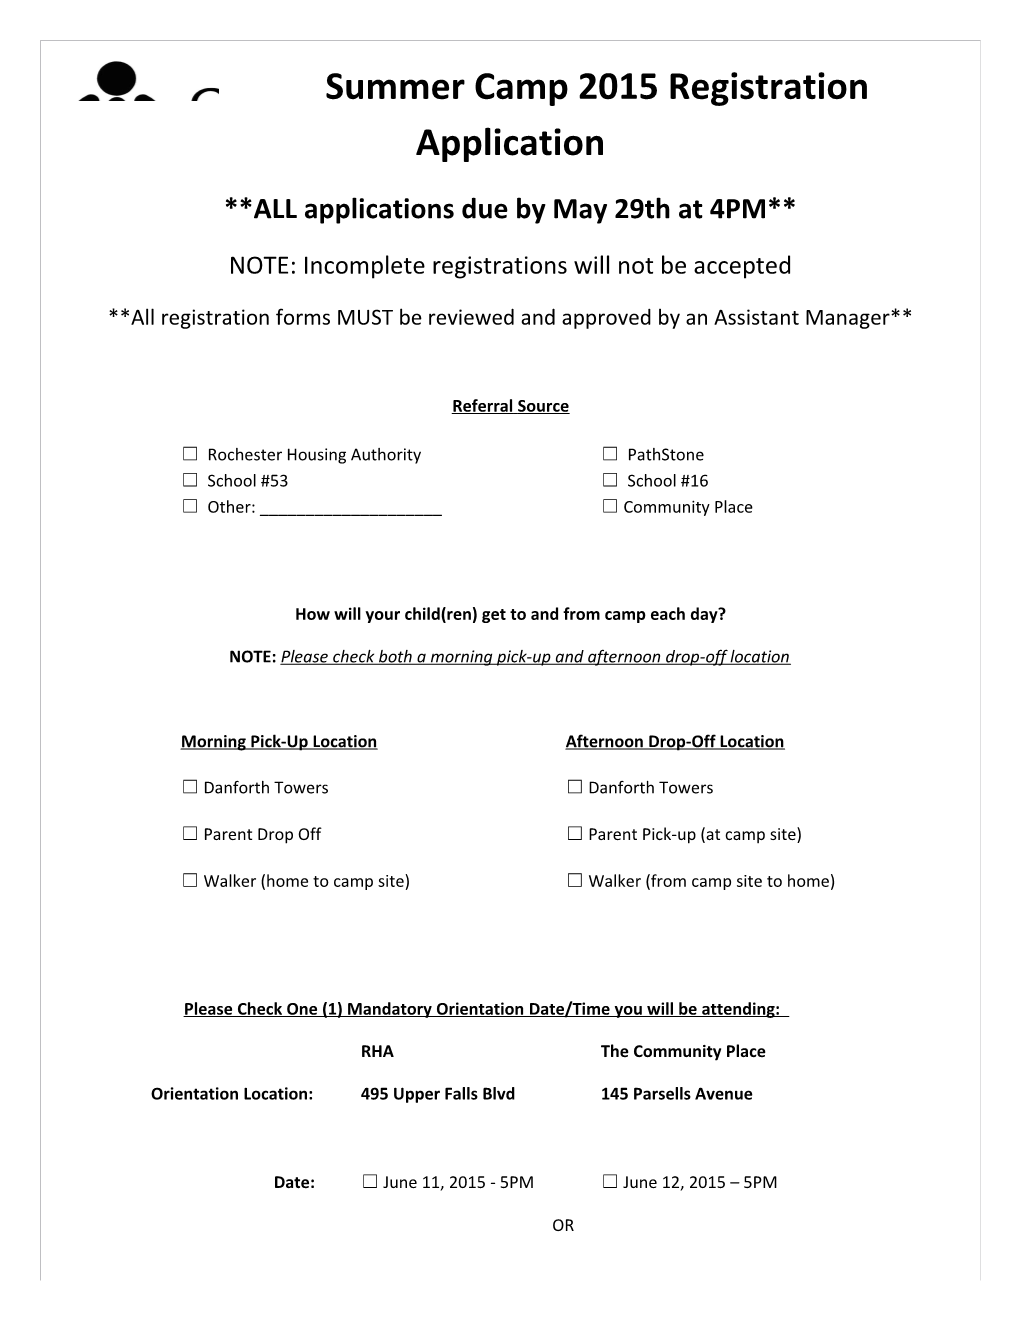 ALL Applications Due by May 29Th at 4PM